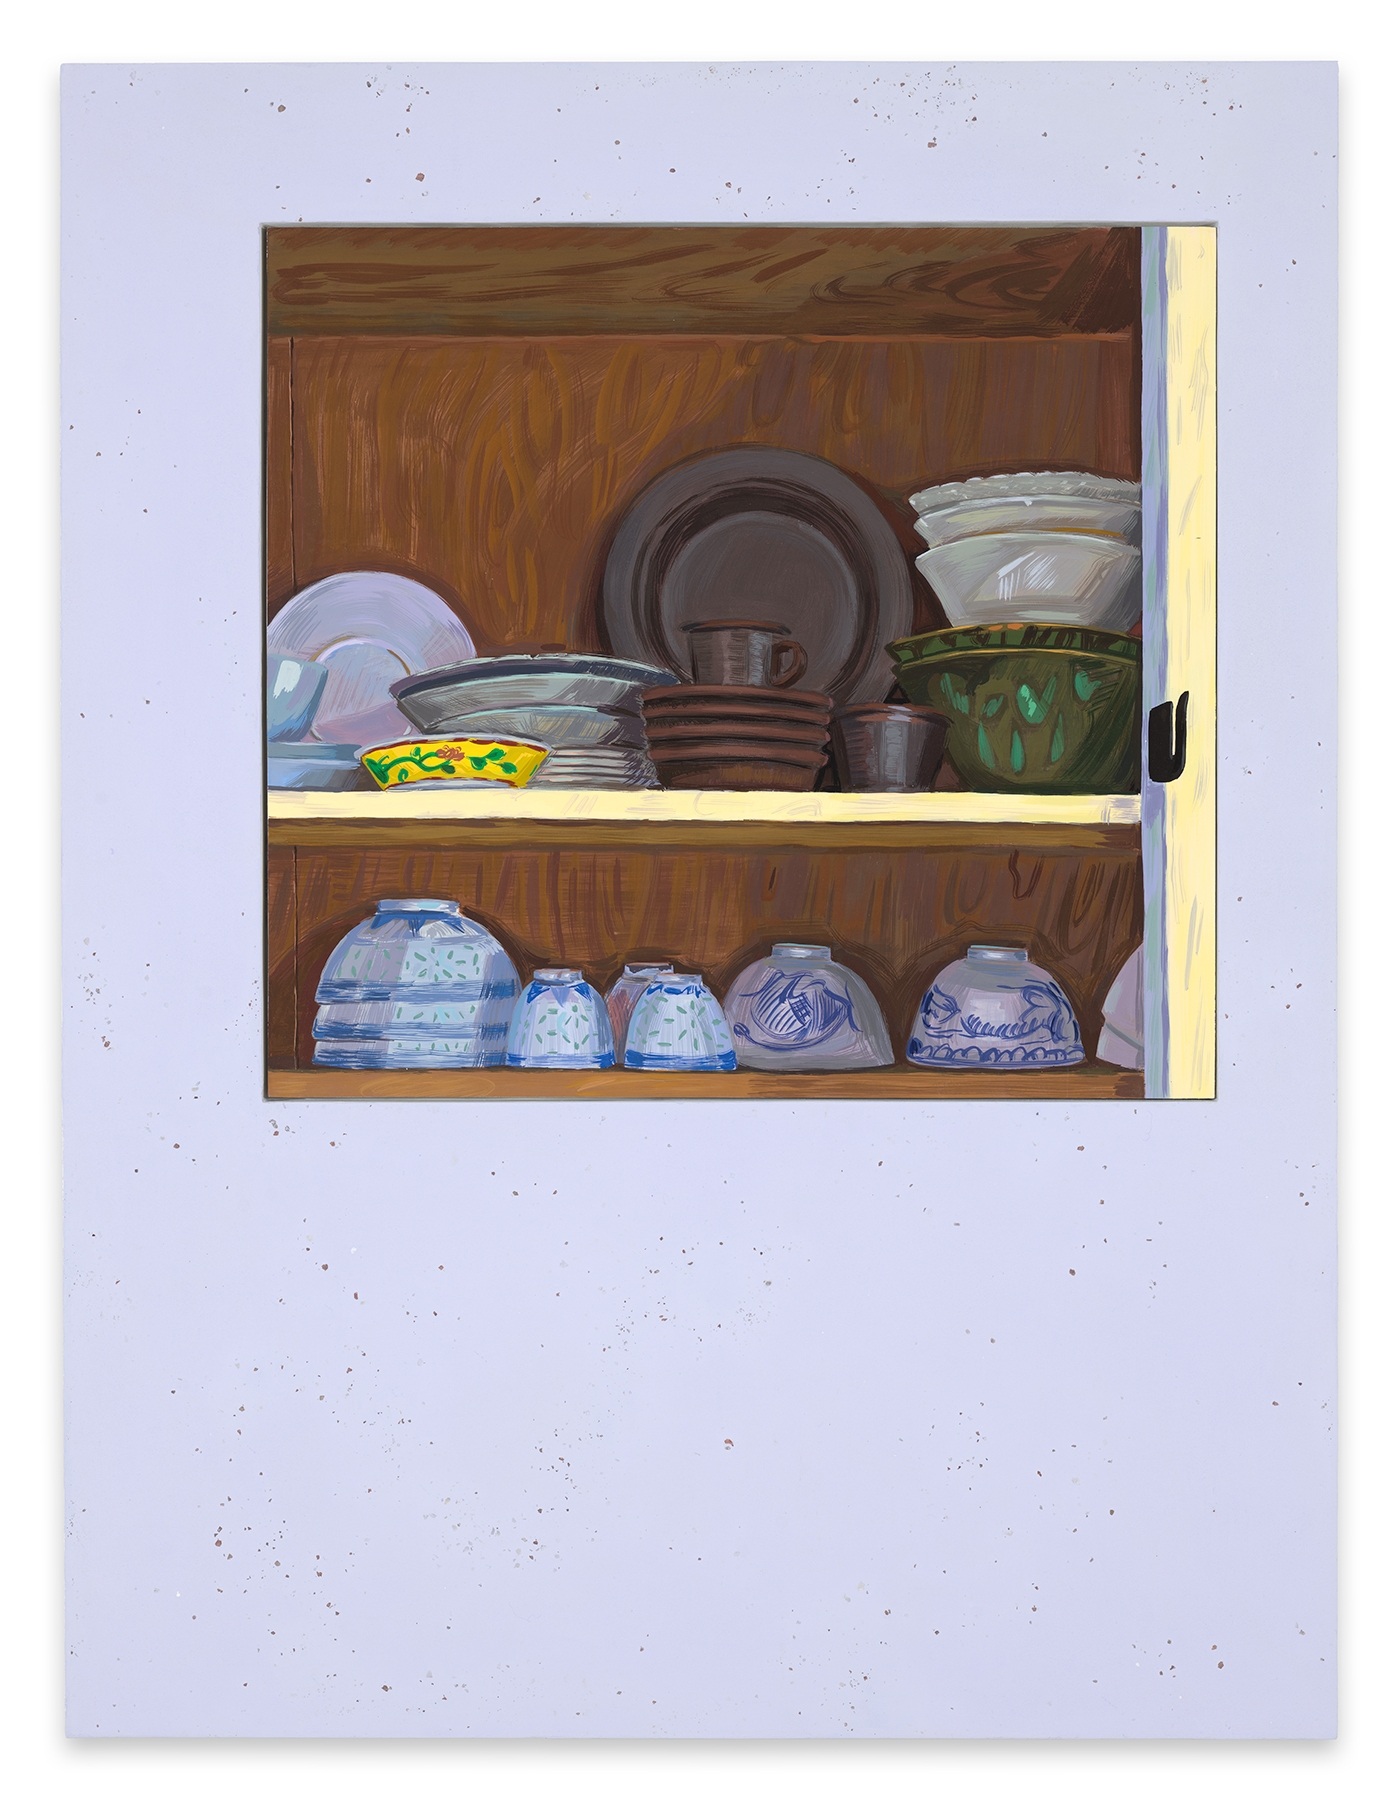 This image shows a painting which is framed in a pigmented pastel lavender panel that includes fragments of earth and rocks from the sites where the paintings were made.  The painting is a horizontal composition that reveals an interior view of 2 wooden shelves in O’Keeffe’s cabinets full of bowls, cups and plates painted in an array of colors and gestural strokes.  The edge of the first shelf, which is painted in a bright but subdued white-yellow, dissects the picture plane bringing the viewer’s attention to the objects on the shelves. The top shelf has stacked white stoneware plates and dishes, a stack of 4 brown stoneware cereal bowls, 2 mugs and a plate, and a stack of two green Mexican ceramic serving bowls with small terra cotta colored chips on the rim along with three white serving bowls stacked on top. In the foreground is a small ceramic bowl with a bright yellow band outlined in red with decorative green leaves and red flowers.  The bottom shelves have 3 stacked blue and white patterned Chinese rice bowls and 3 Chinese teacups and 2 rice bowls stored rimmed side down.